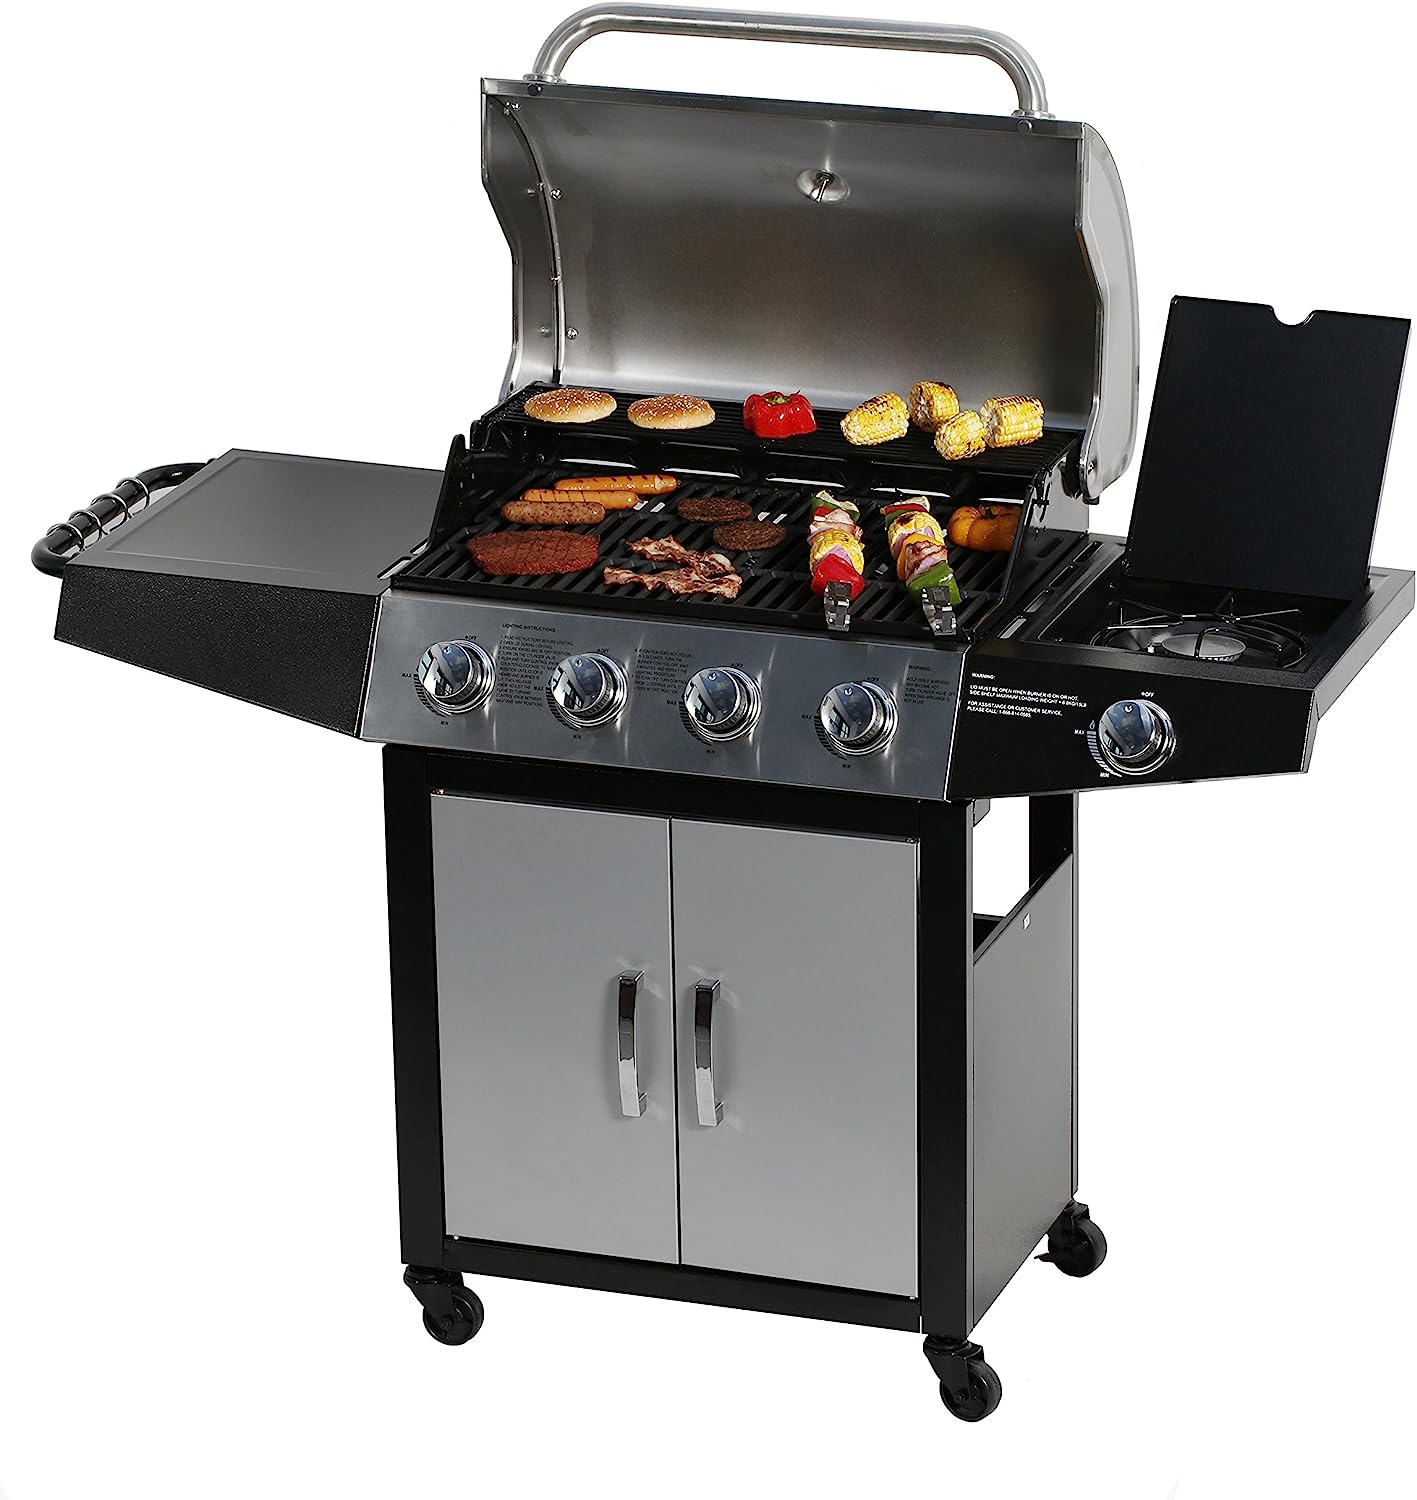 BBQ oven